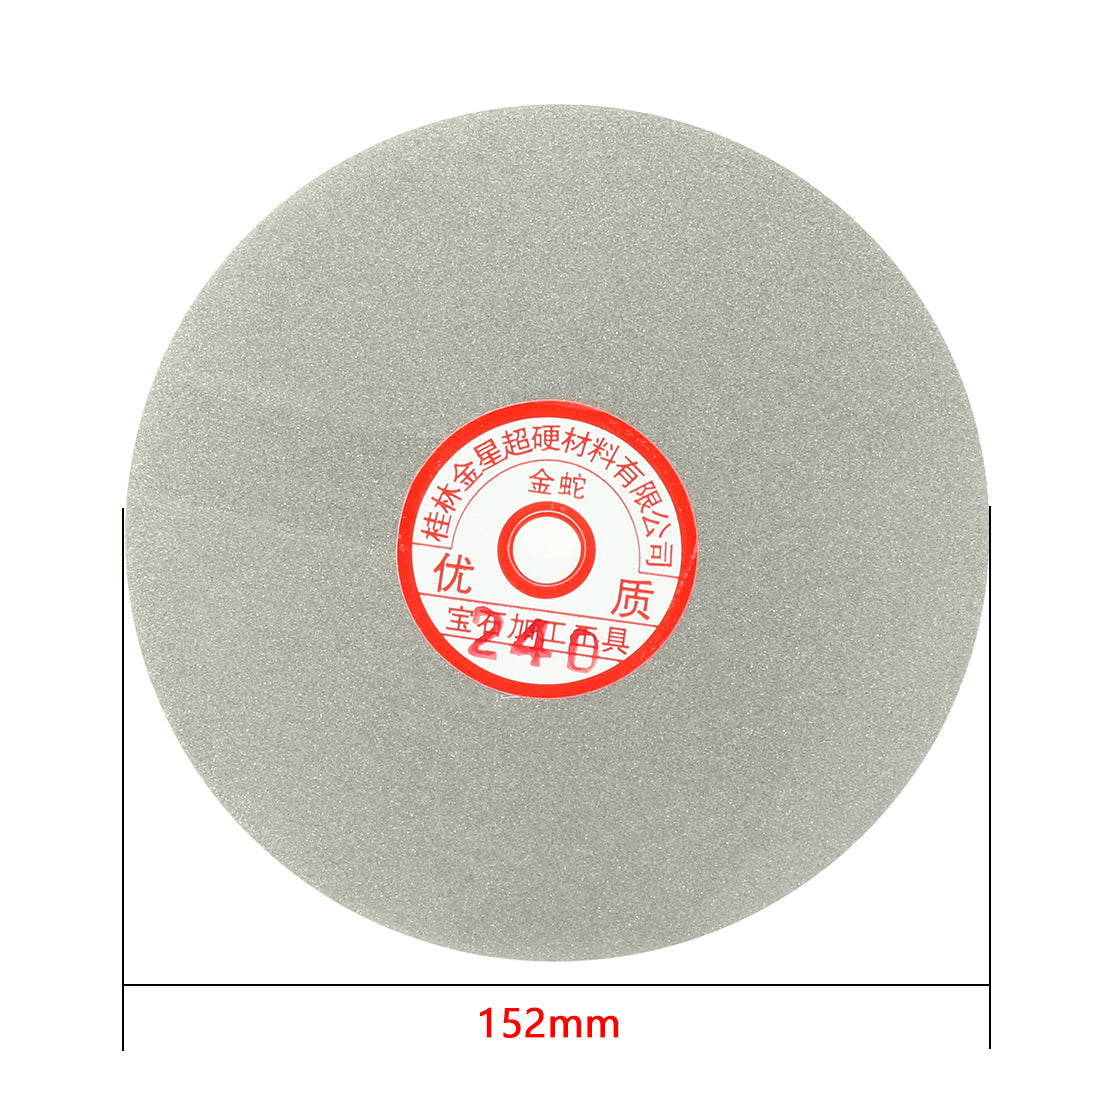 uxcell Uxcell 6-inch Grit 240 Diamond Coated Flat Lap Wheel Grinding Sanding Polishing Disc